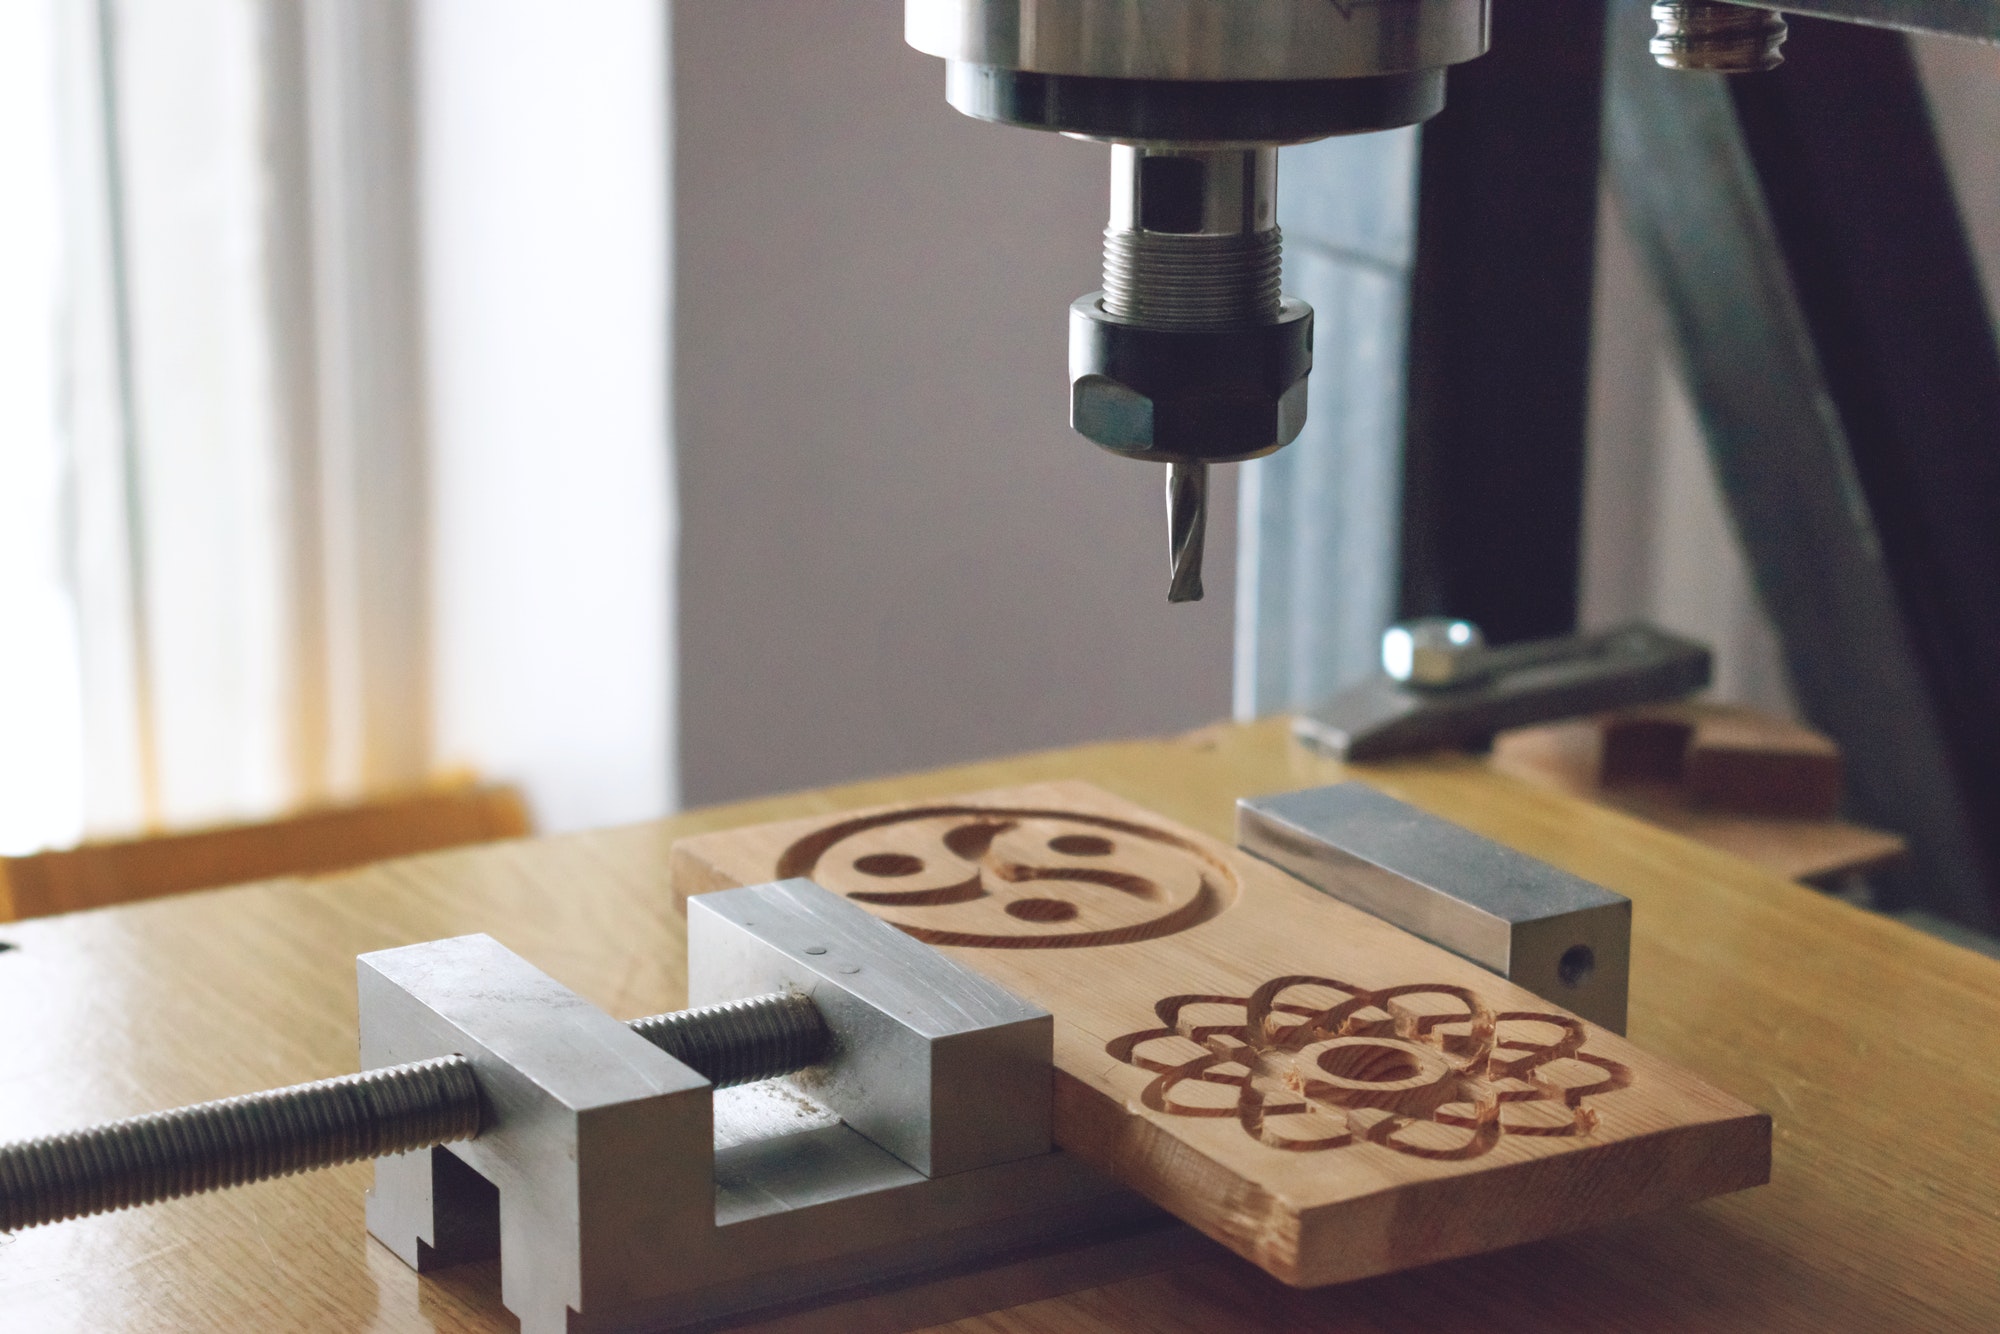 wood cutting machine 3D wood cnc router. CNC milling machine carving a wooden part blank. Cutter